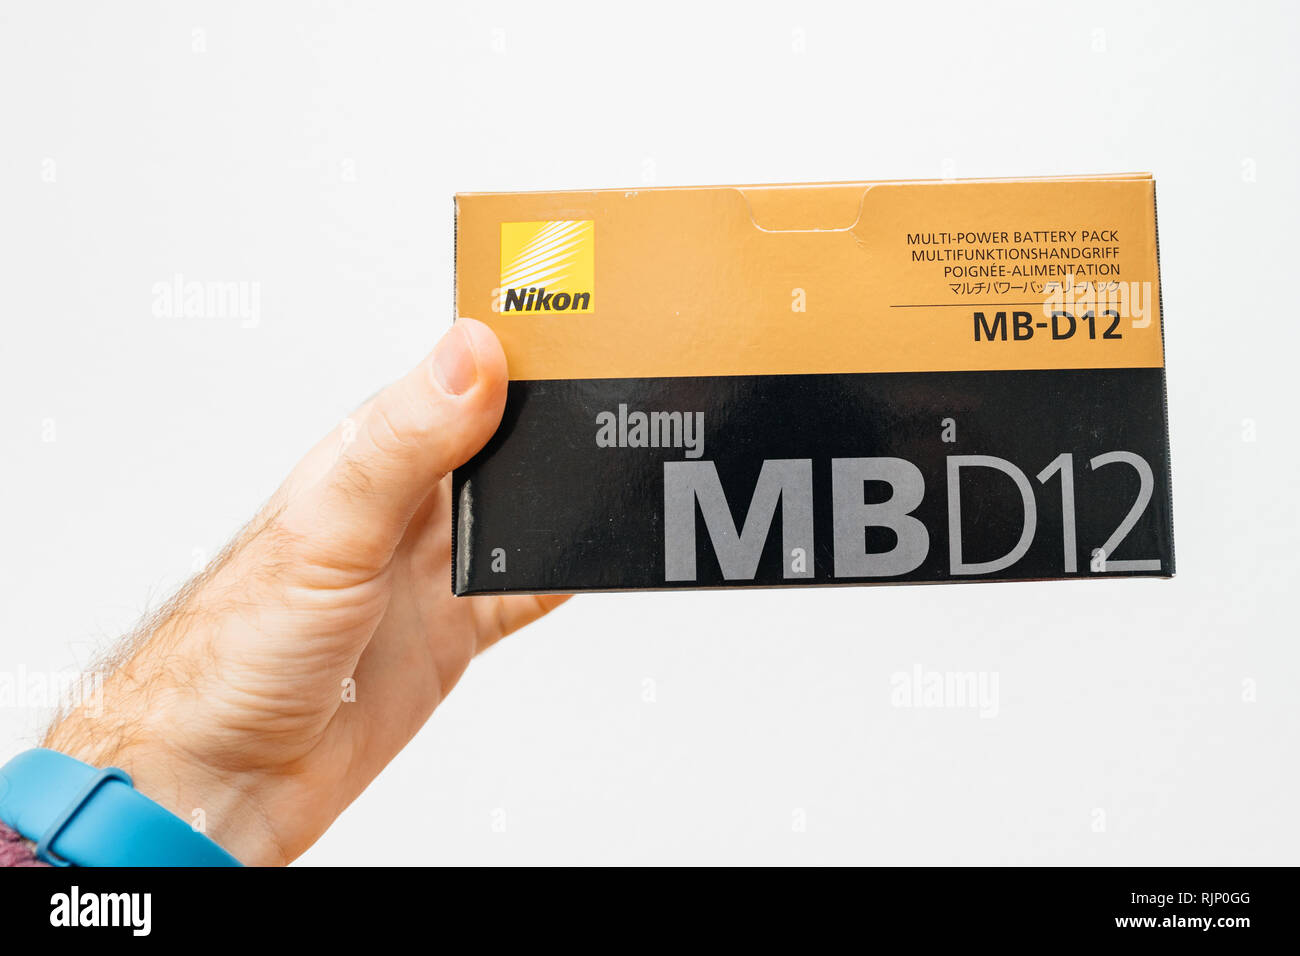 PARIS, FRANCE - FEB 5, 2018: Photographer hand holding against white background a box with Nikon MB-D12 camera grip for the Nikon D810 D800 professional DSLR camera front view Stock Photo